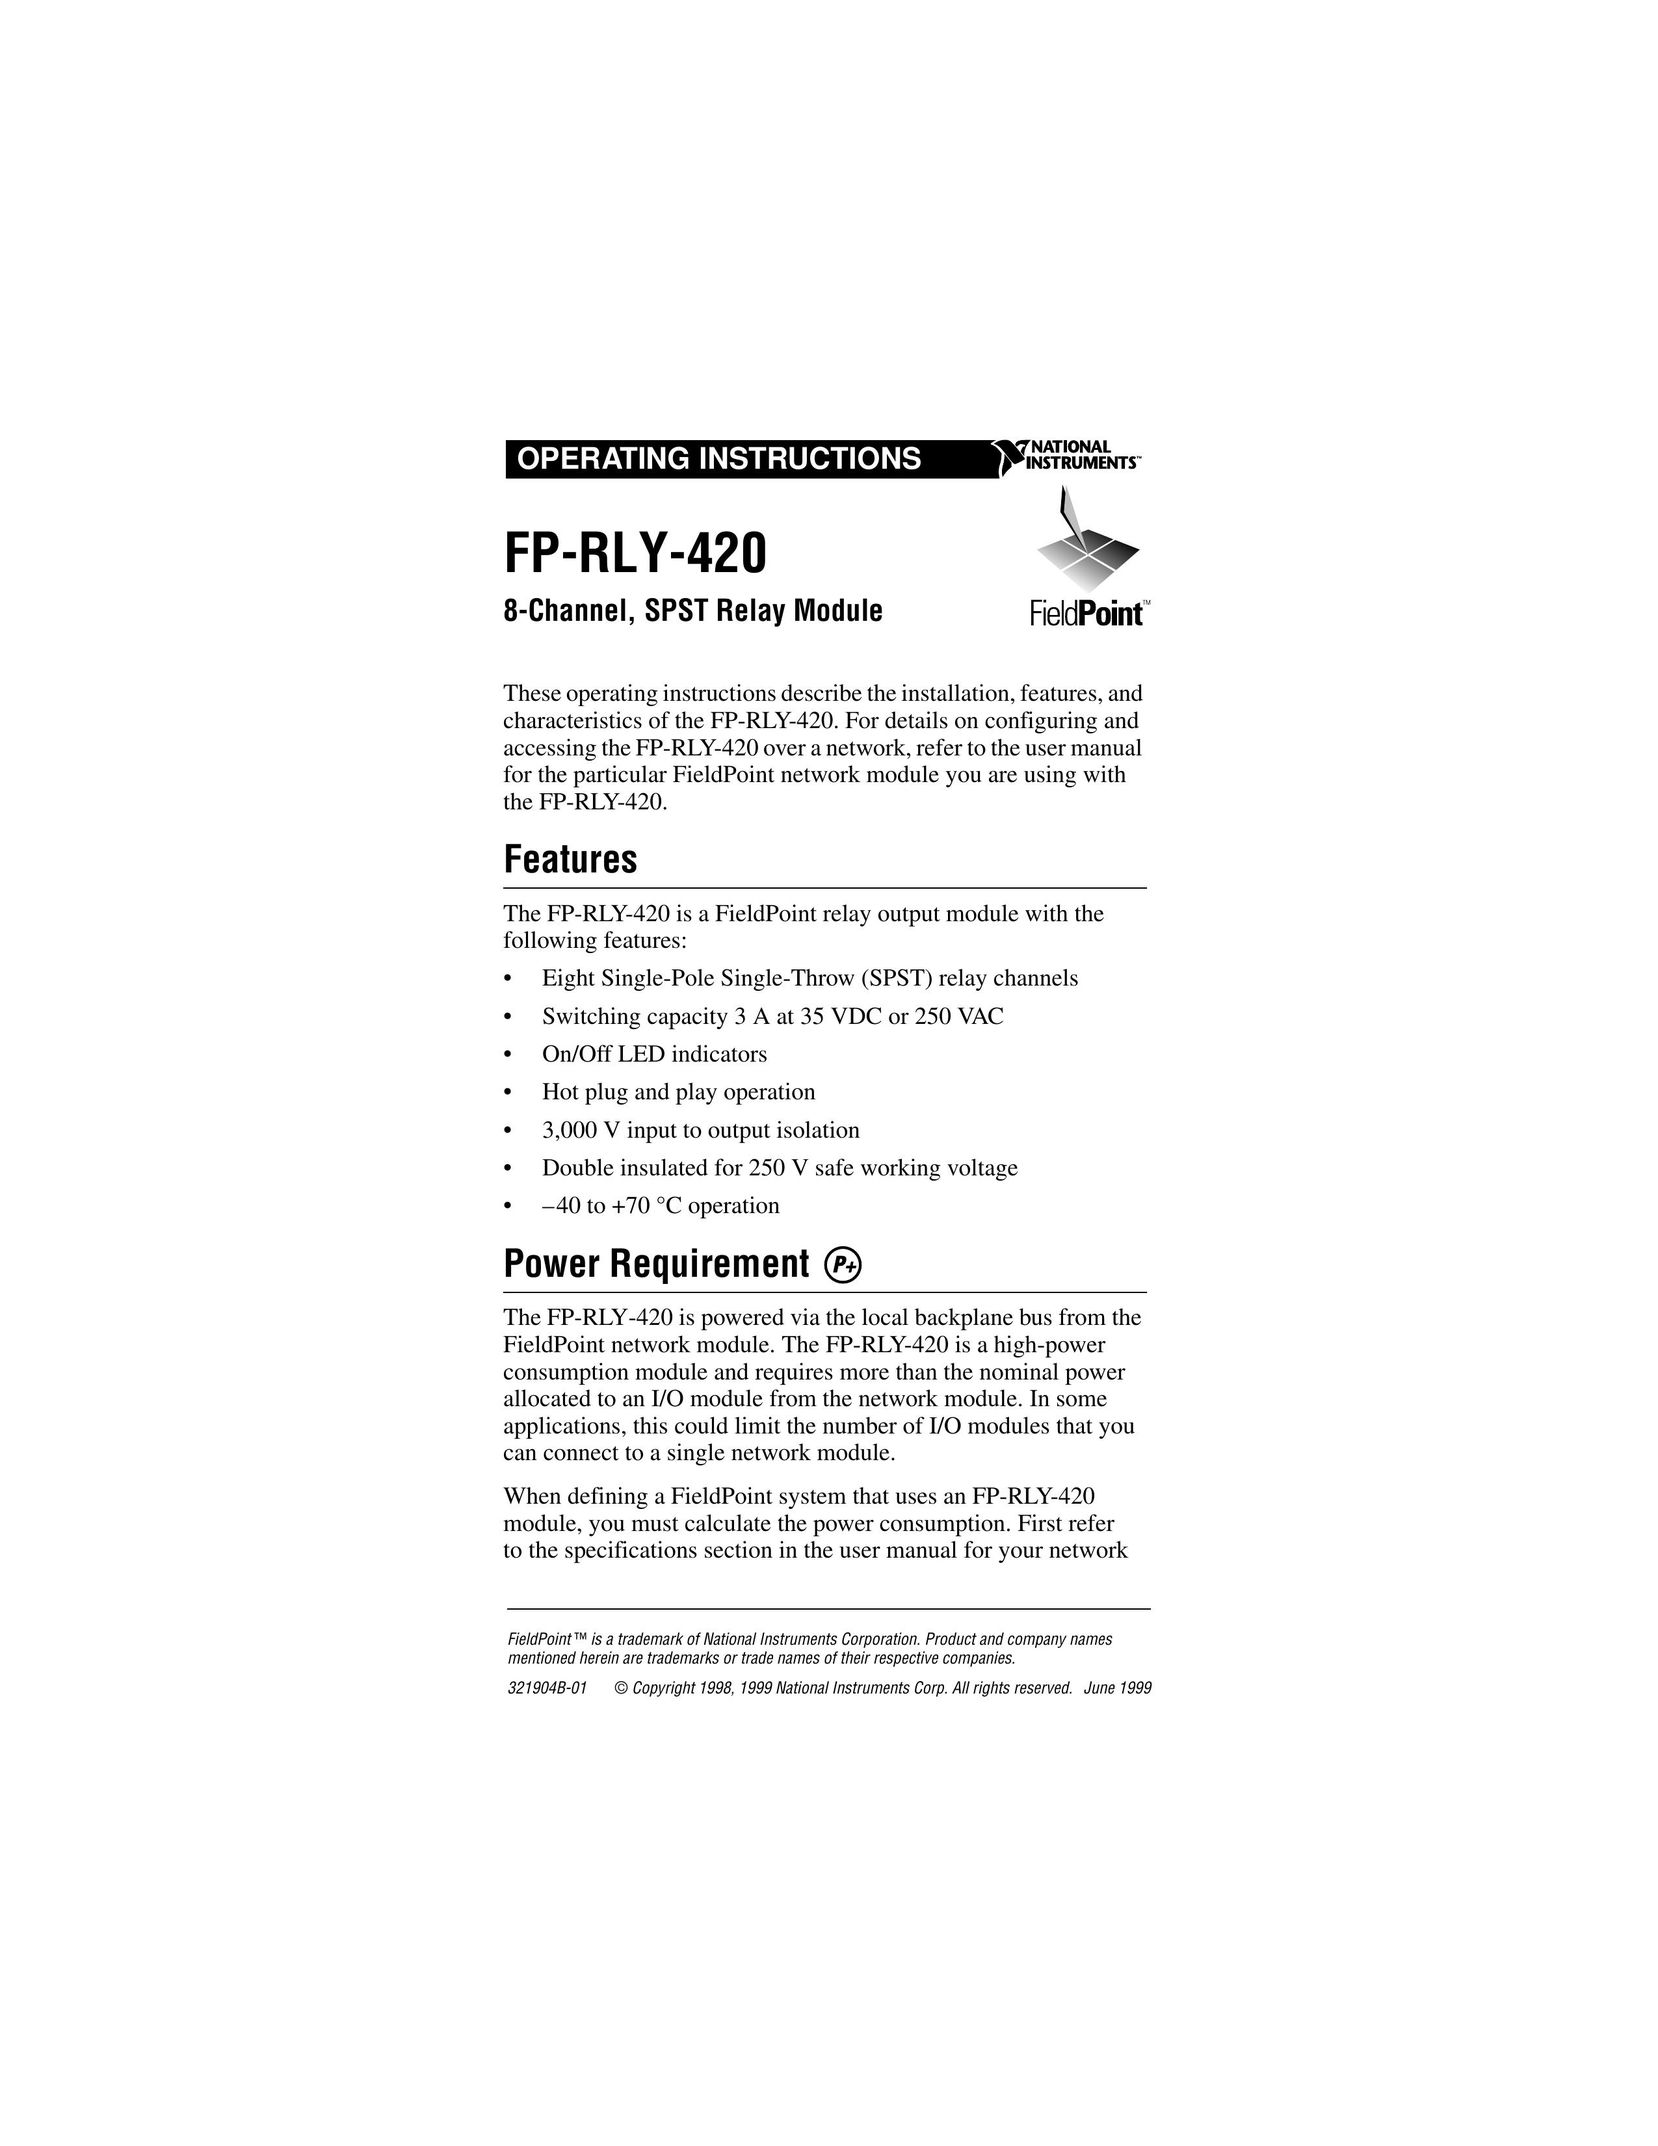 National Instruments FP-RLY-420 Network Card User Manual